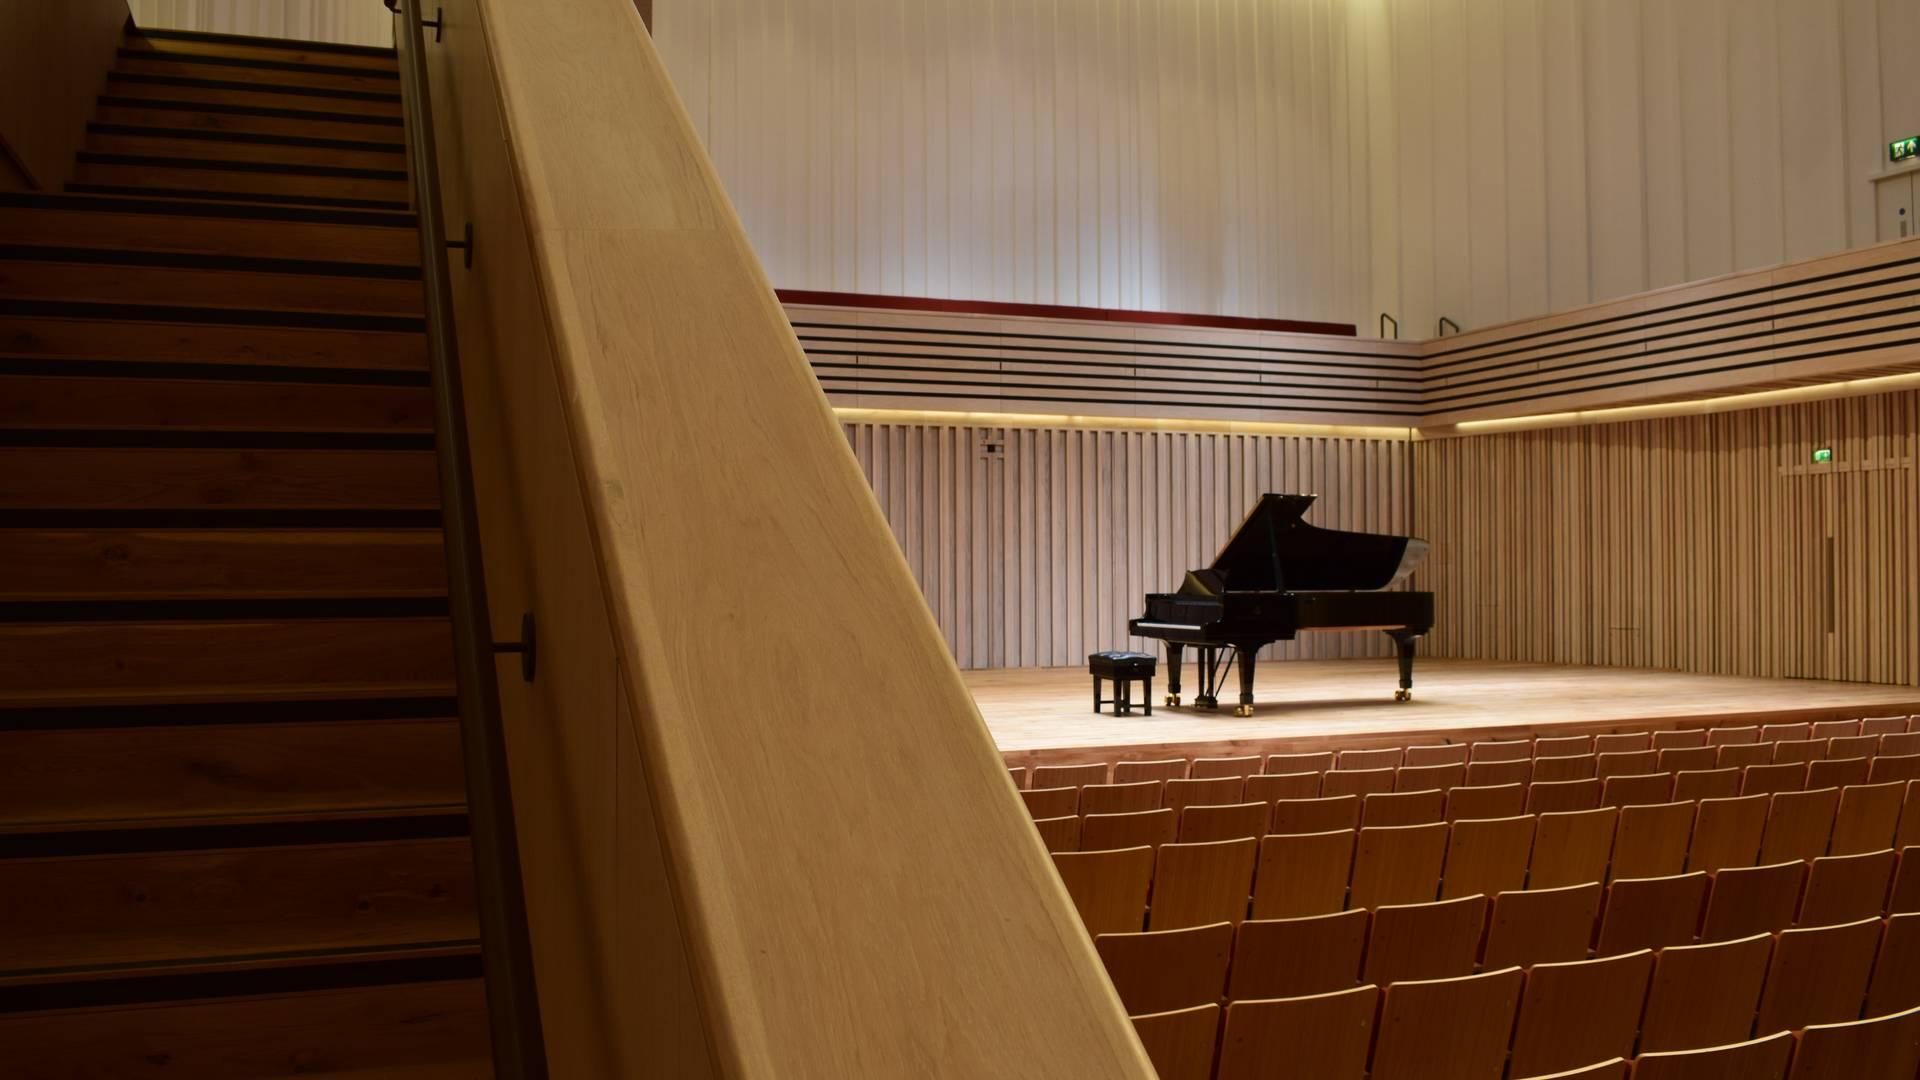 The Stoller Hall photo